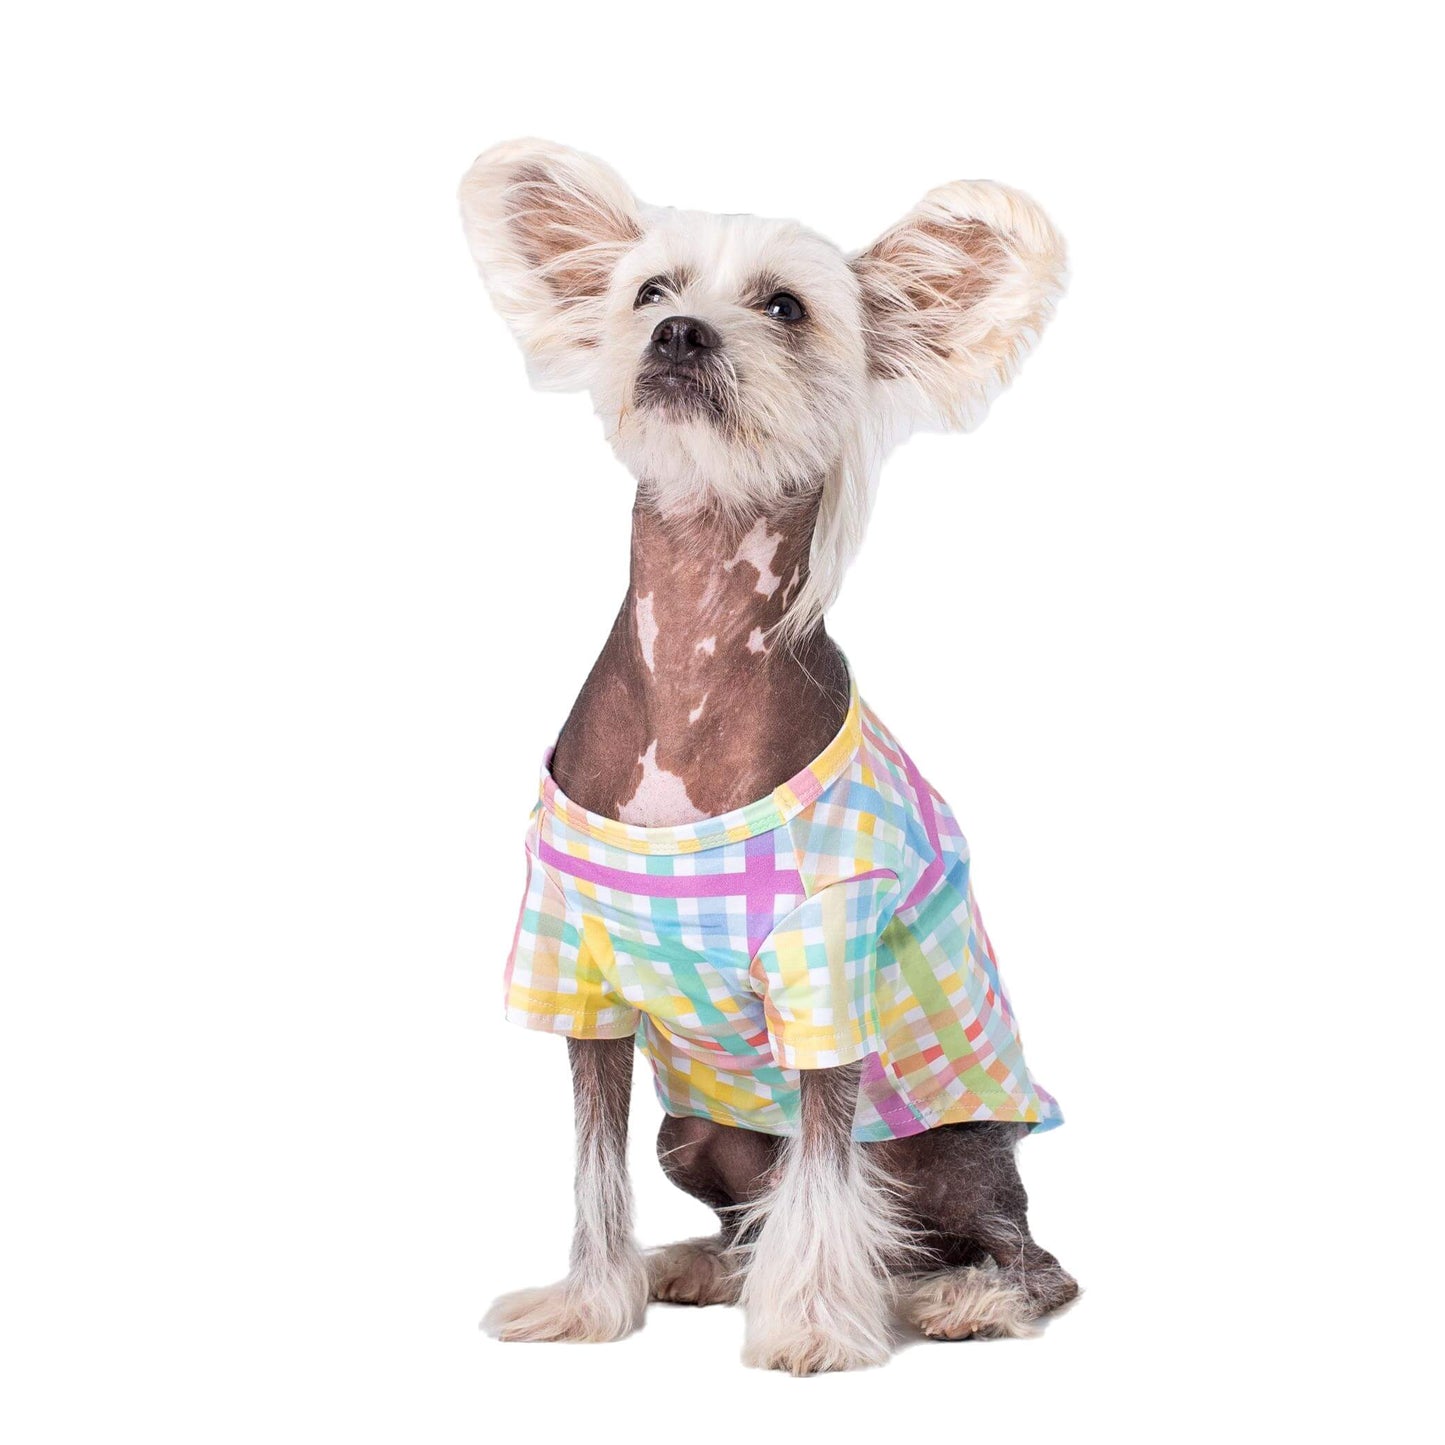 Chinese Crested dog wearing a vibrant Colour Me Gingham shirt by Vibrant Hound, showcasing the rainbow colors.